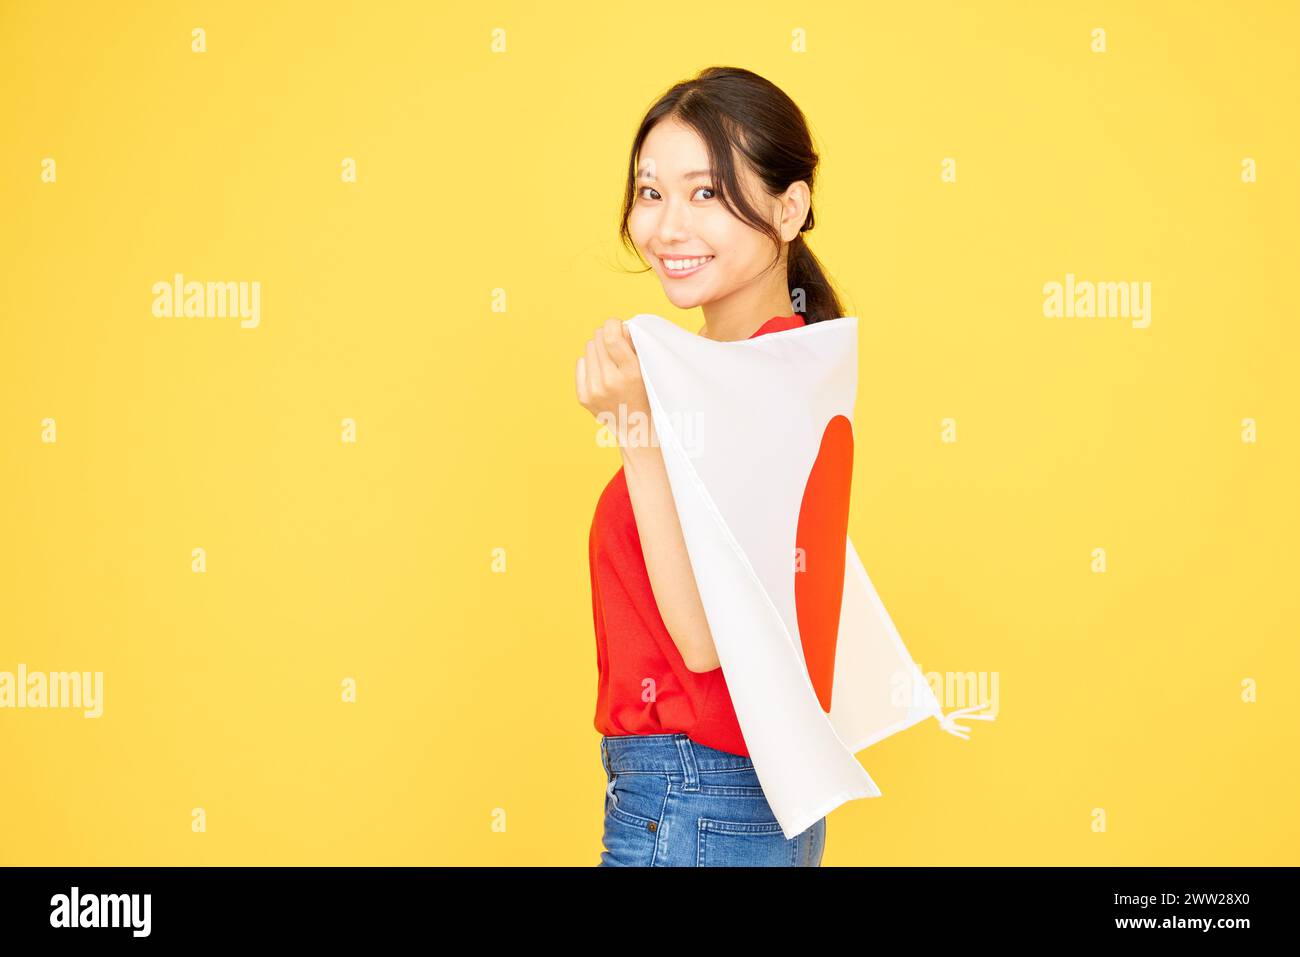 A woman holding a Japanese flag over a yellow background Stock Photo